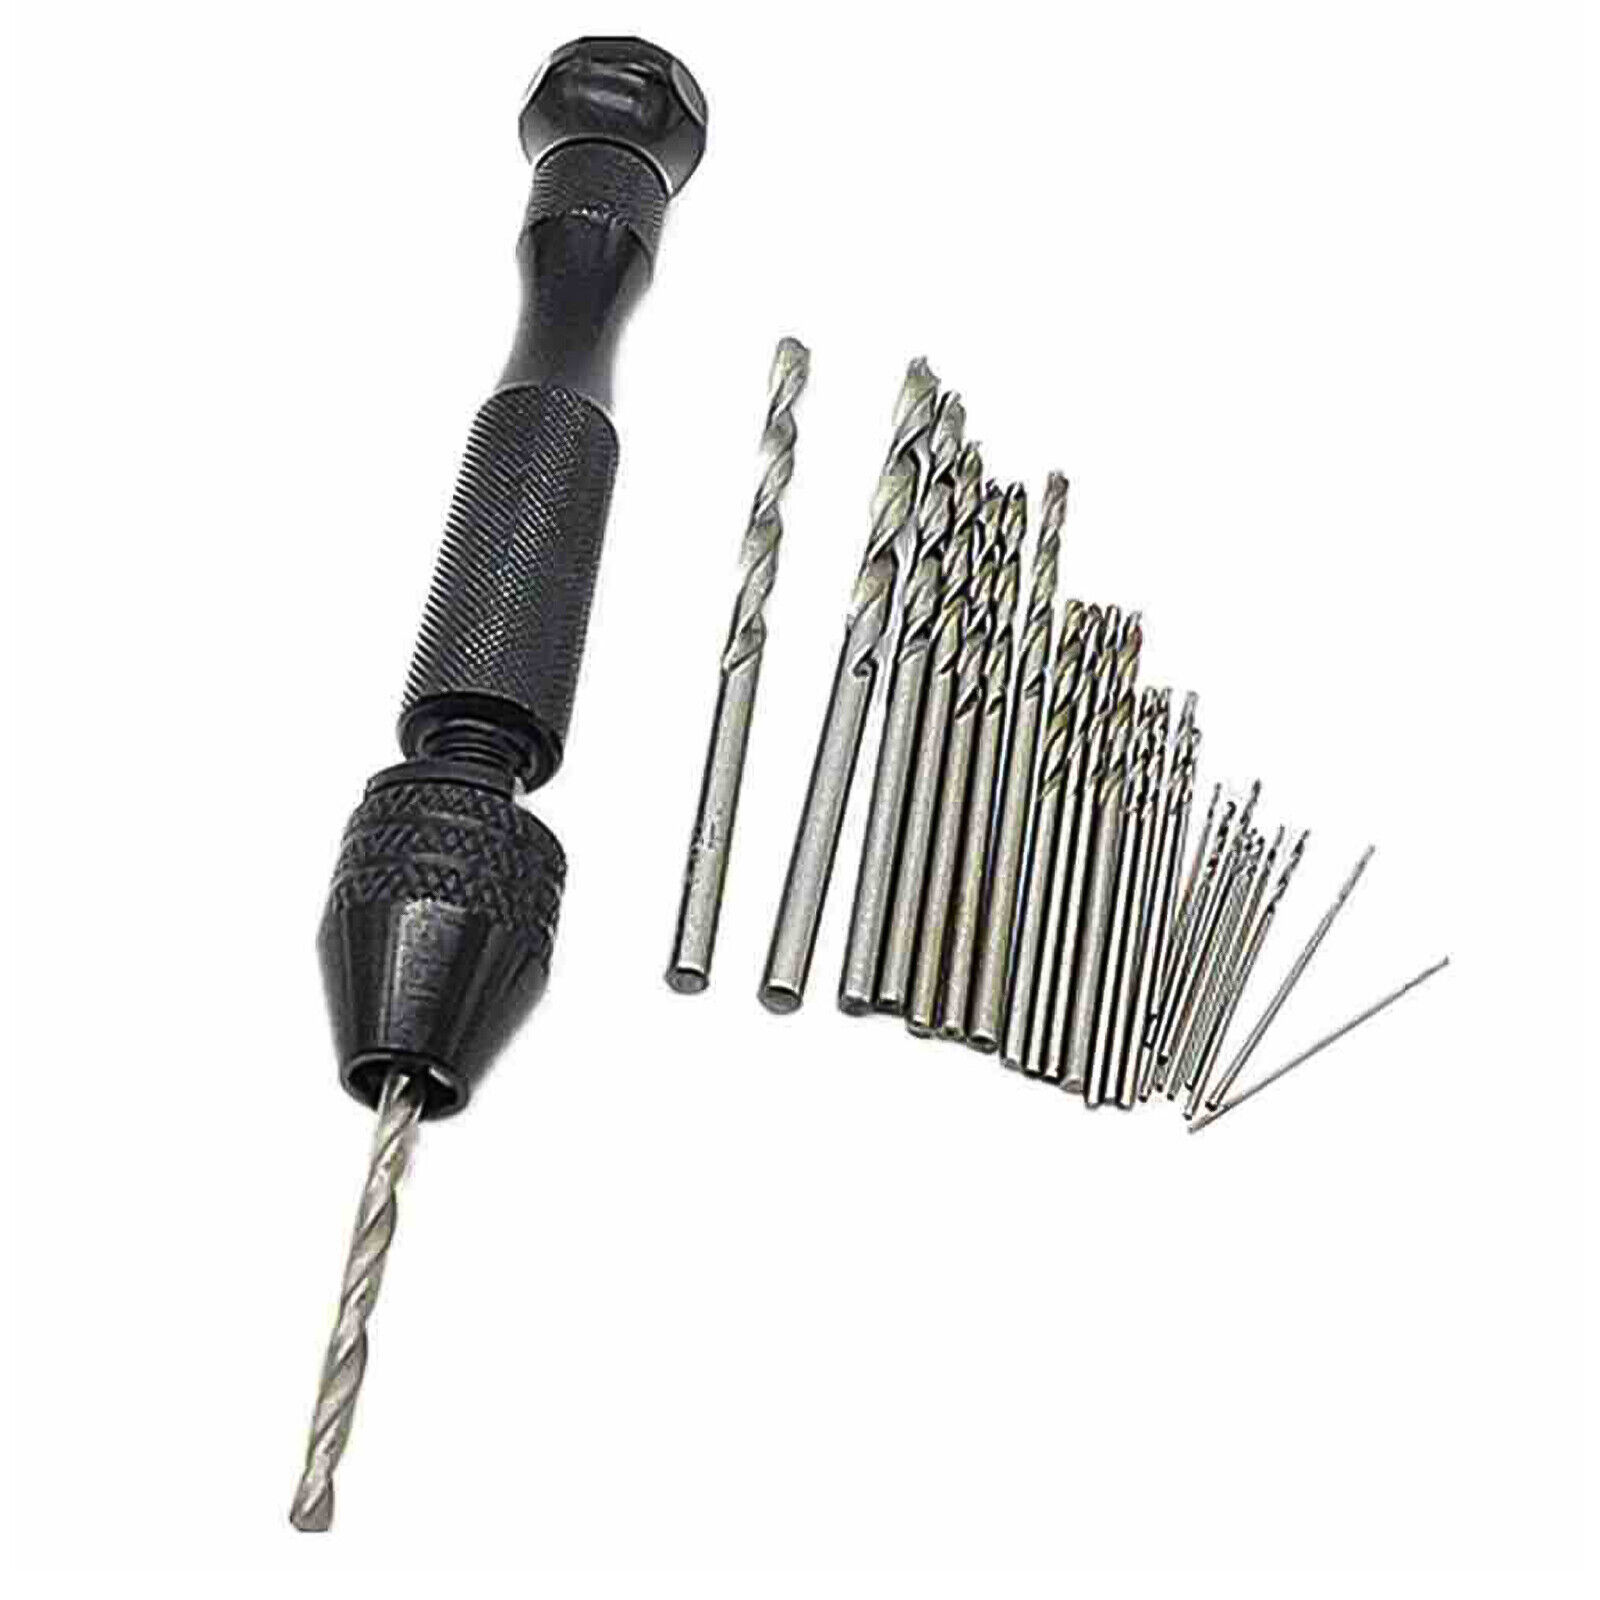 26x Pin Vise Pen Hand Twist Drill Bits Rotary Tool For Jewelry Metal Wood Repair